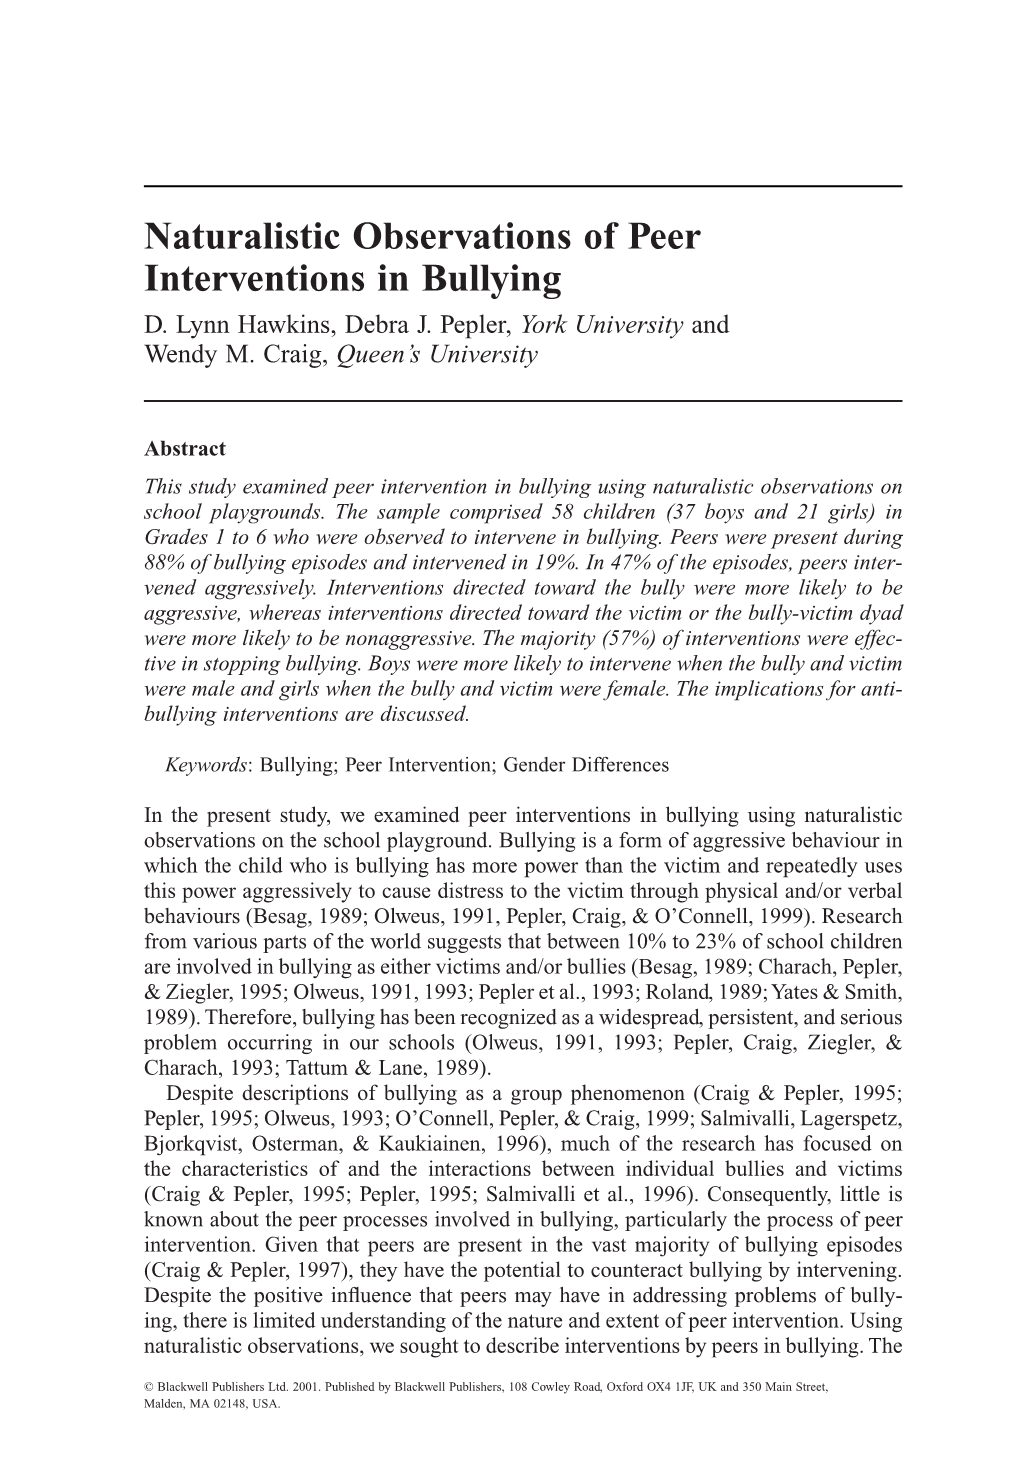 Naturalistic Observations of Peer Interventions in Bullying D